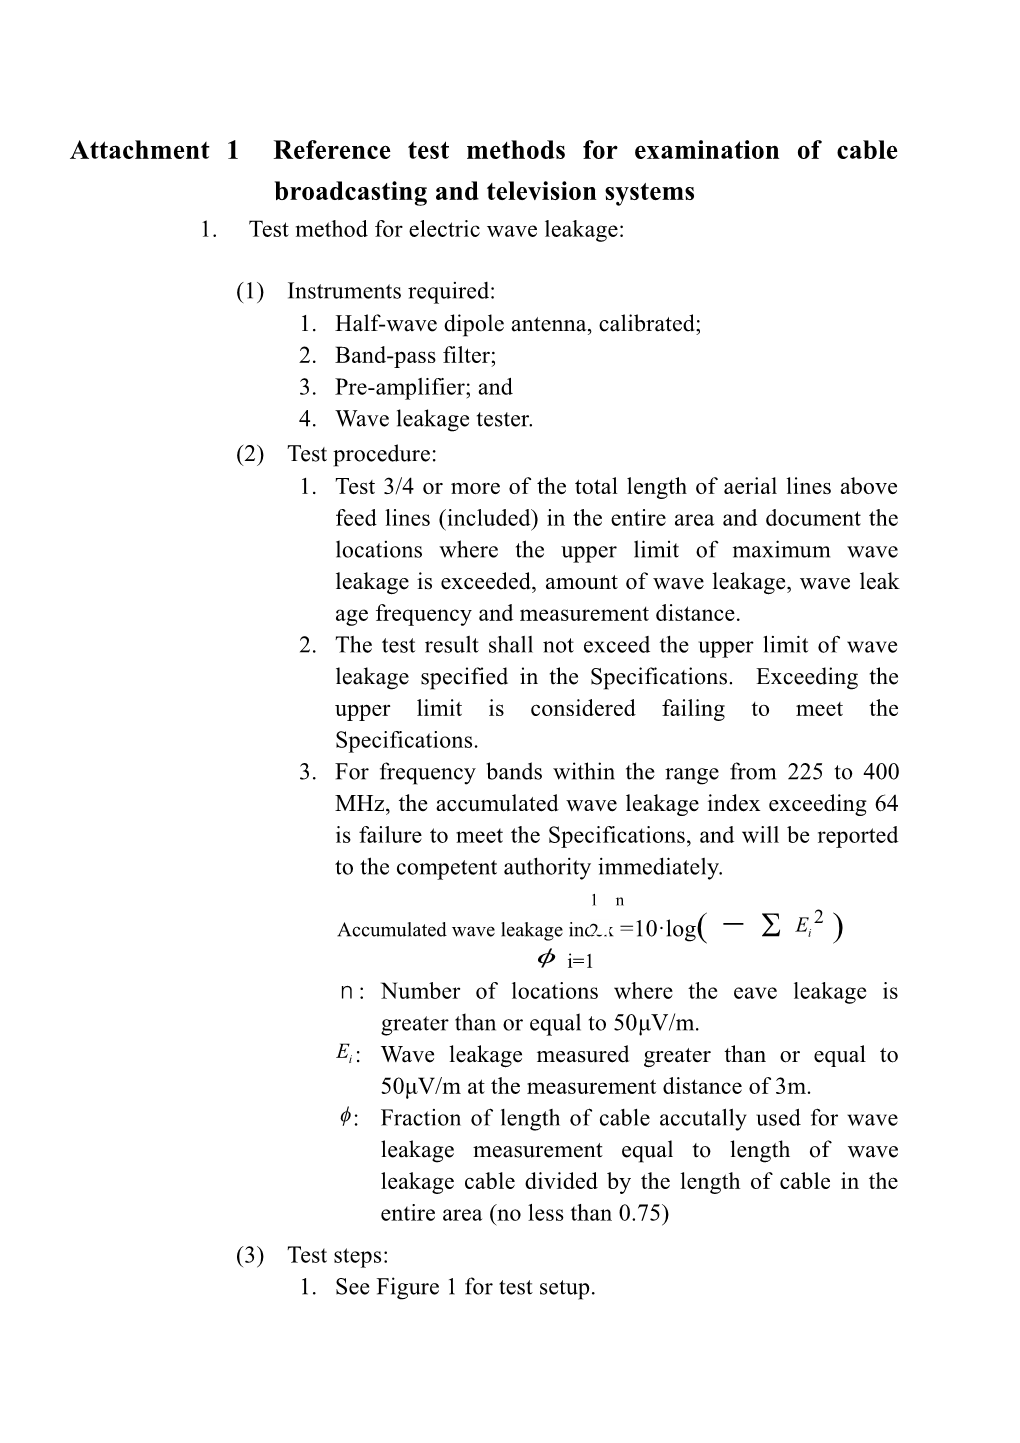 Attachment 1 Reference Test Methods for Examination of Cable Broadcasting and Television